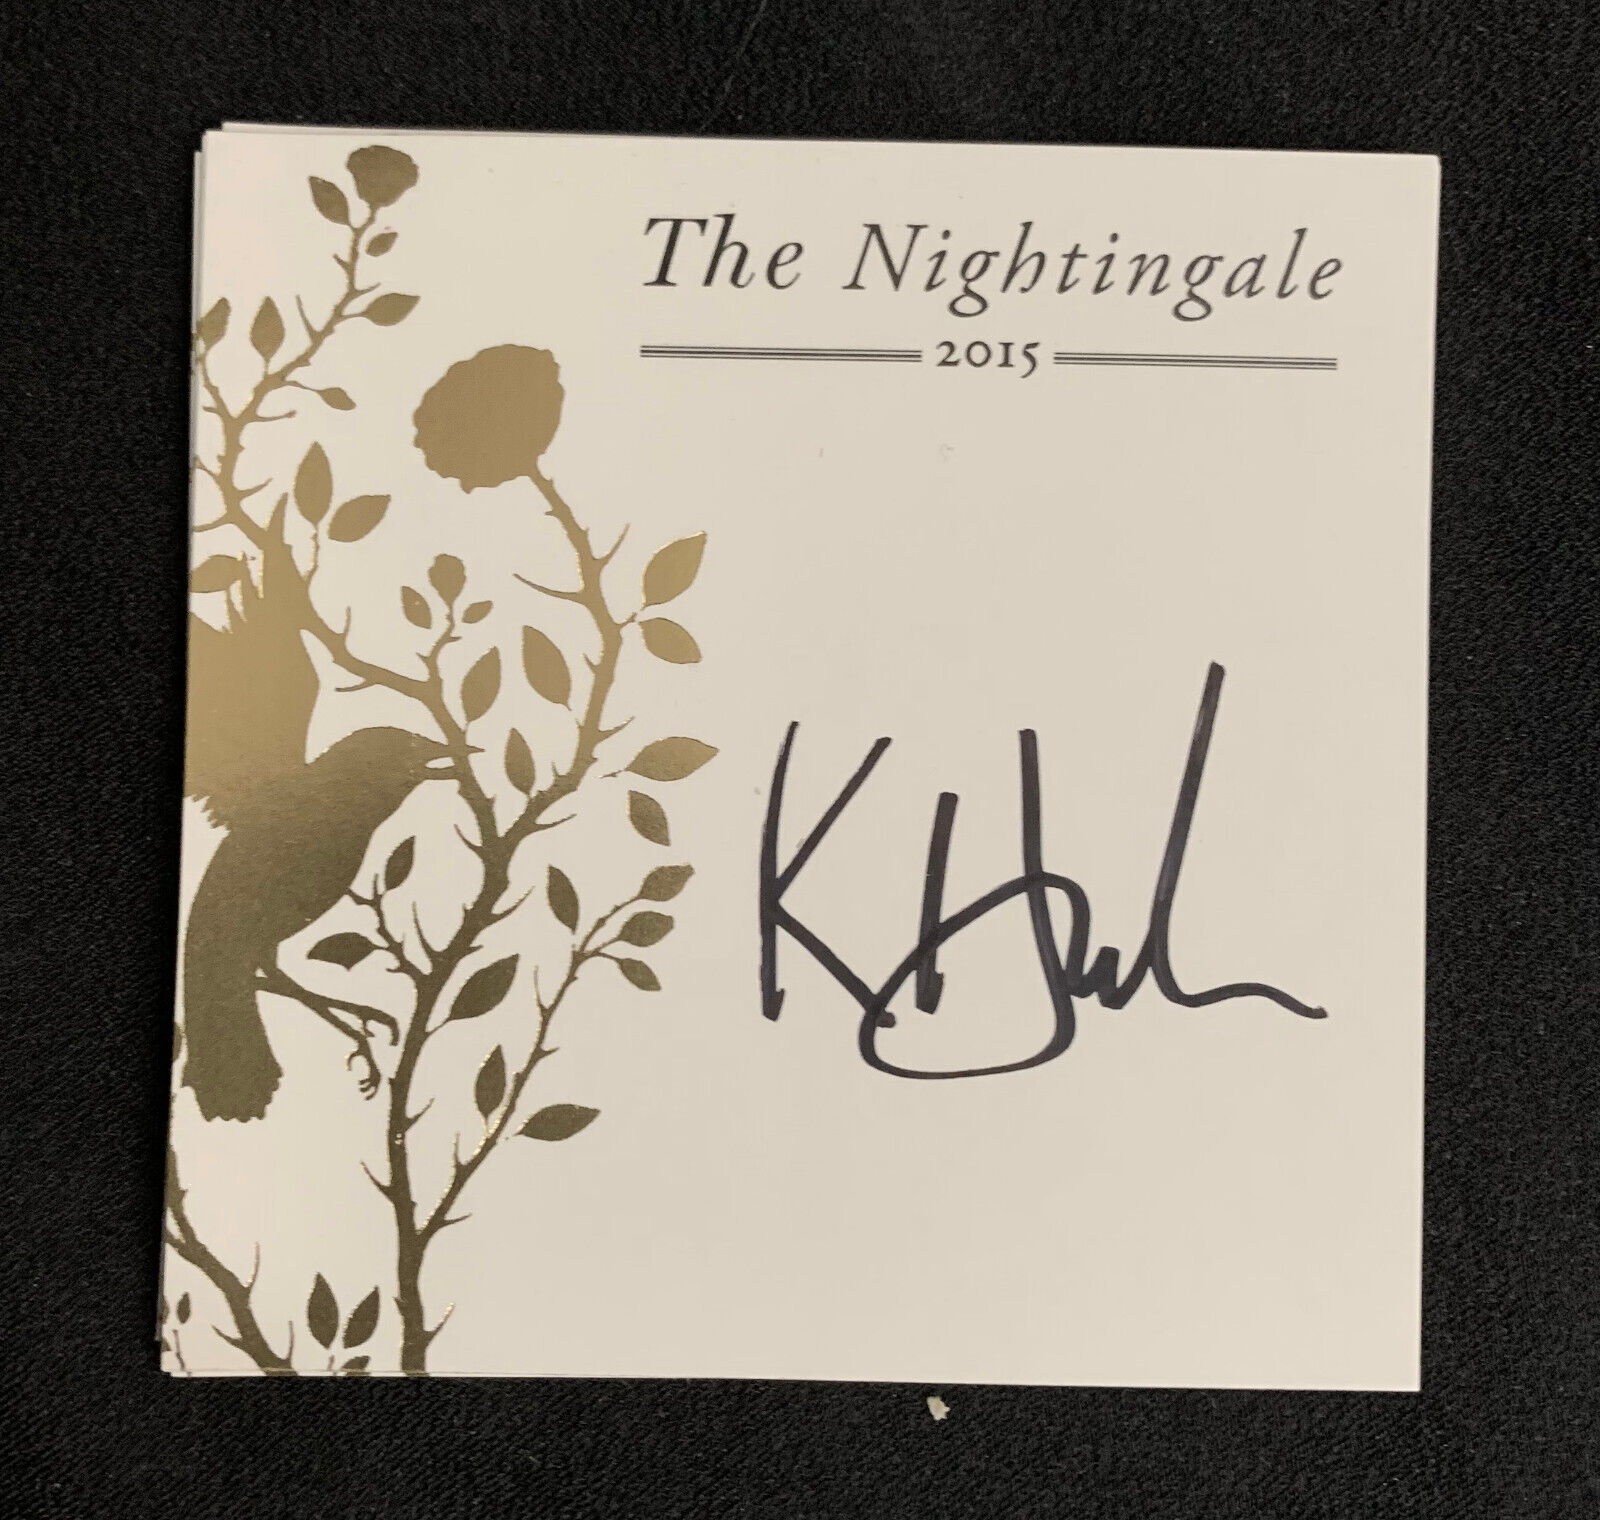 KRISTIN HANNAH AUTOGRAPHED BOOKPLATE hand signed AUTHOR The Nightingale